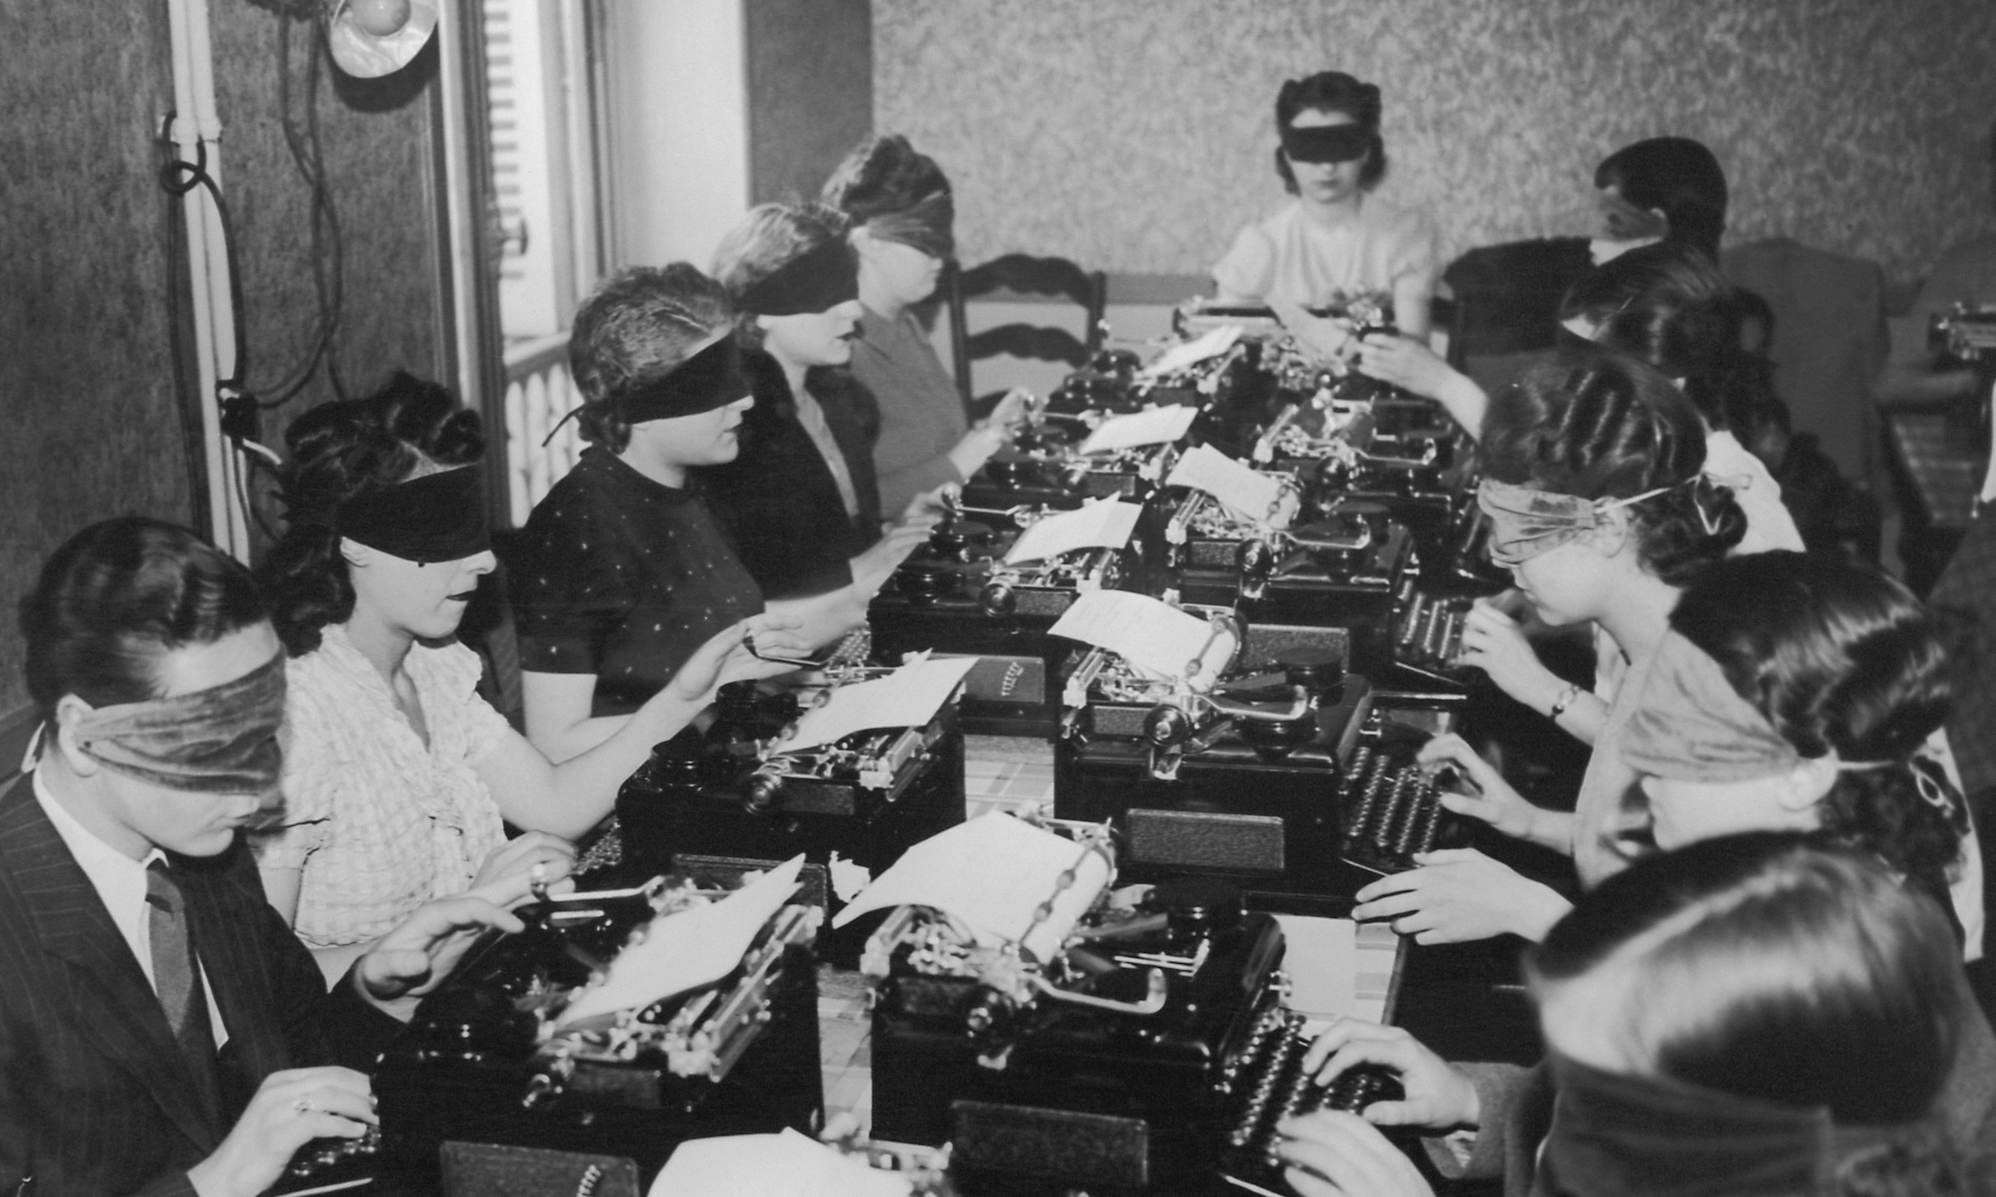 Some old-timey types type at typewriters while blindfolded.